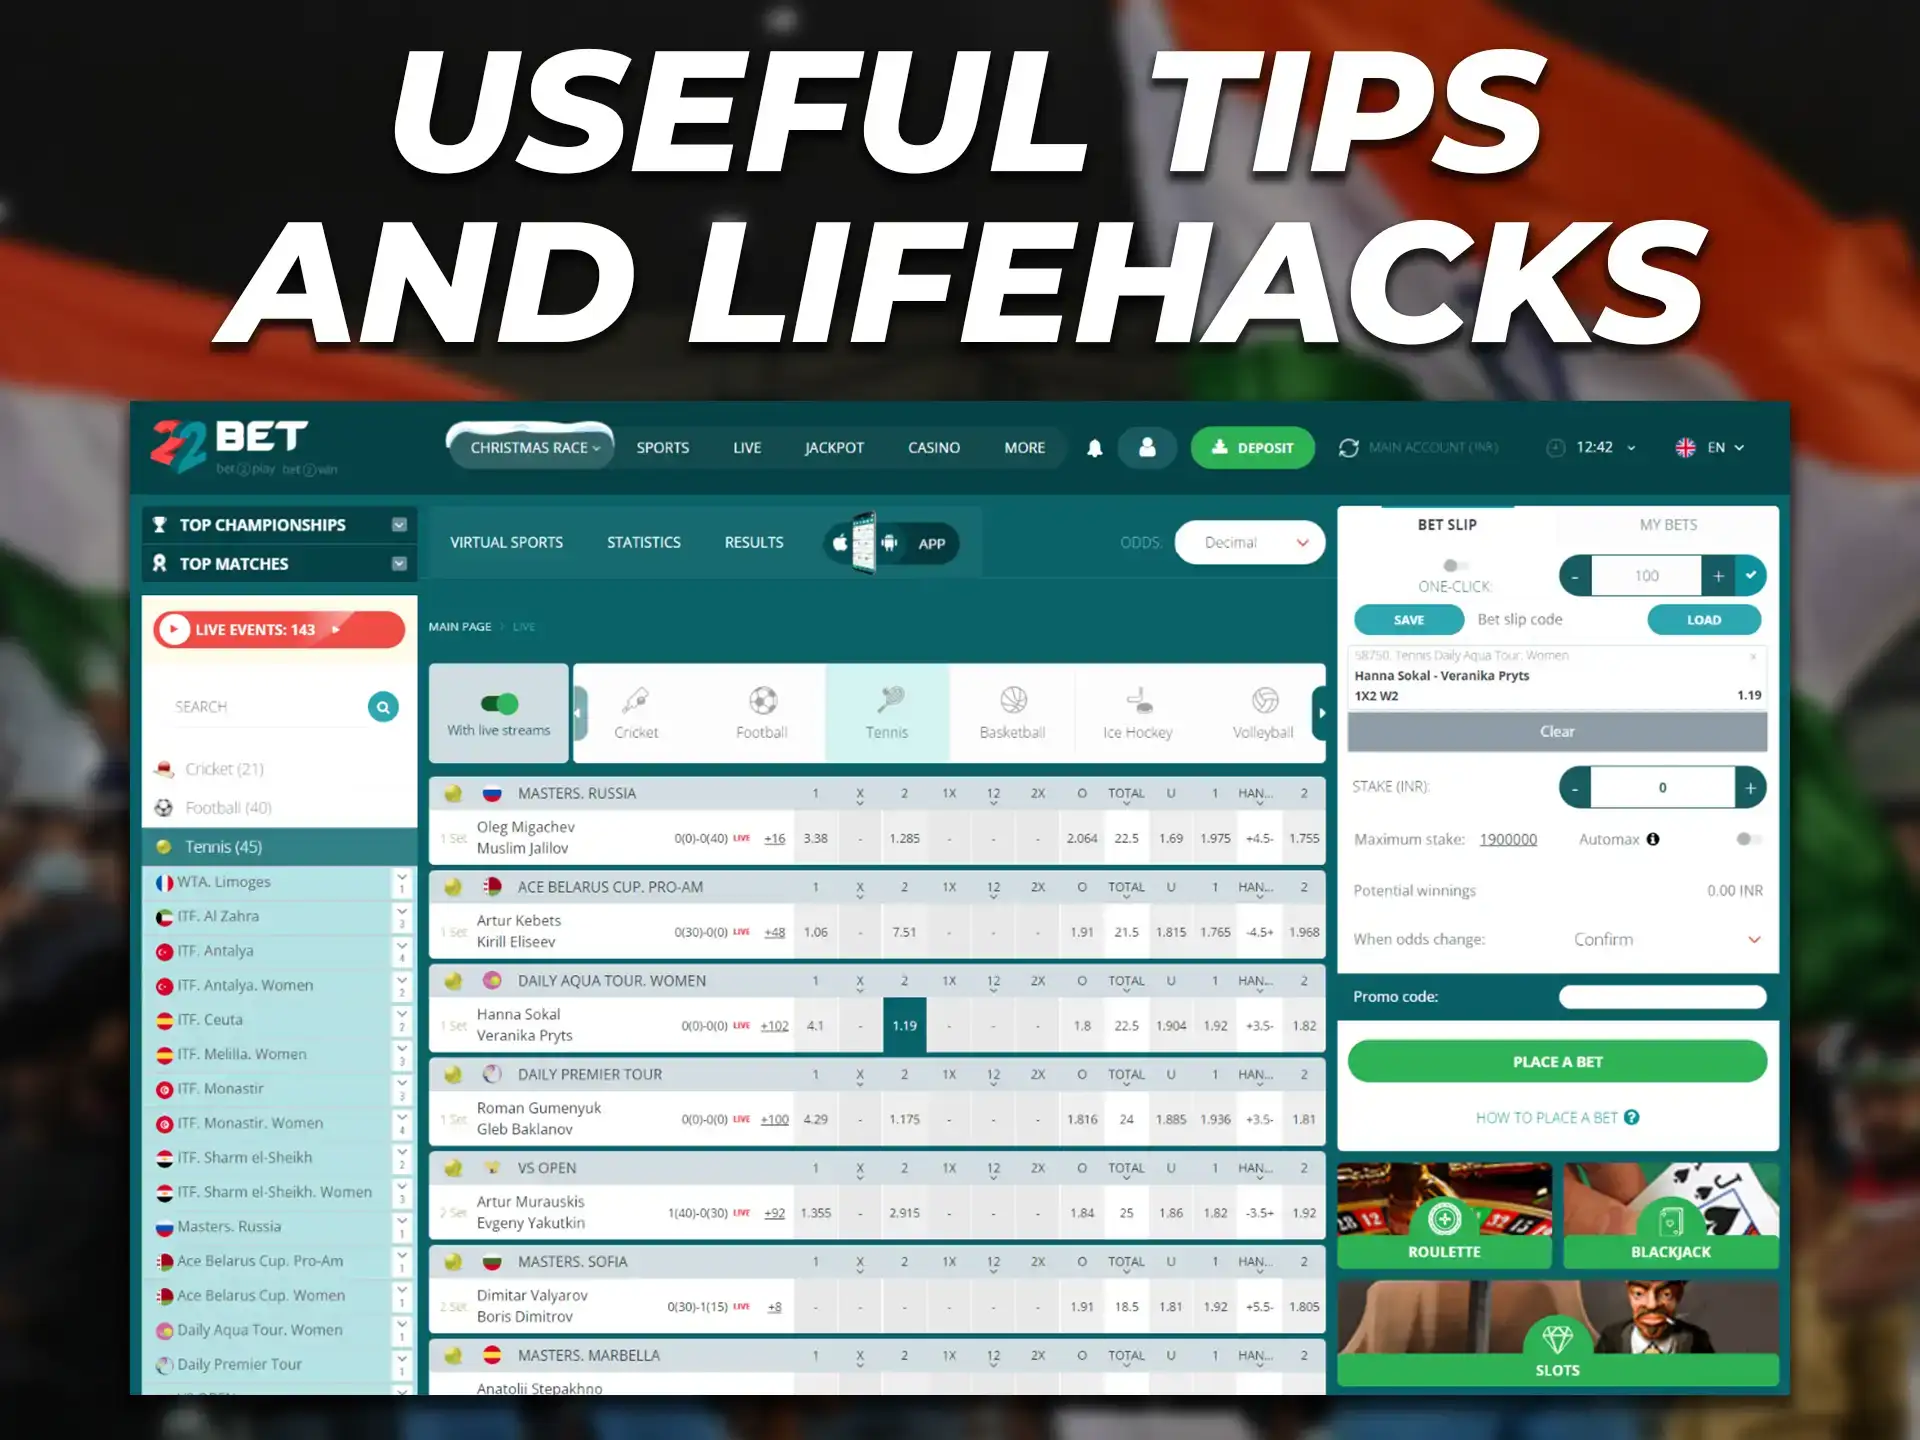 A list of useful tips and lifehacks to help the bettor win more at betting.